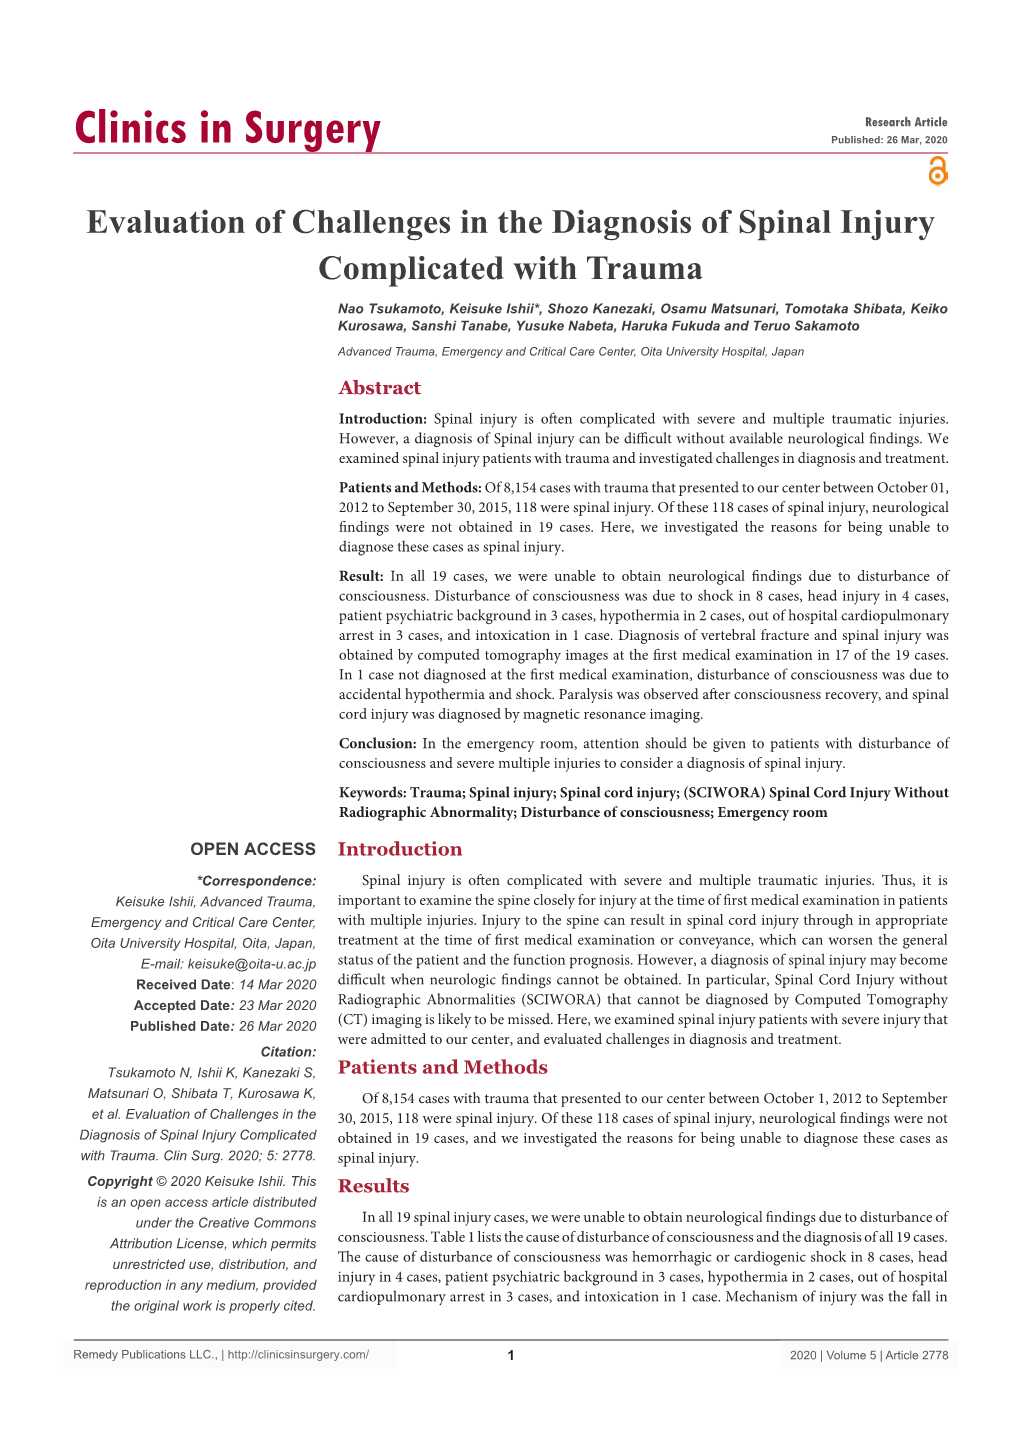 Evaluation of Challenges in the Diagnosis of Spinal Injury Complicated with Trauma